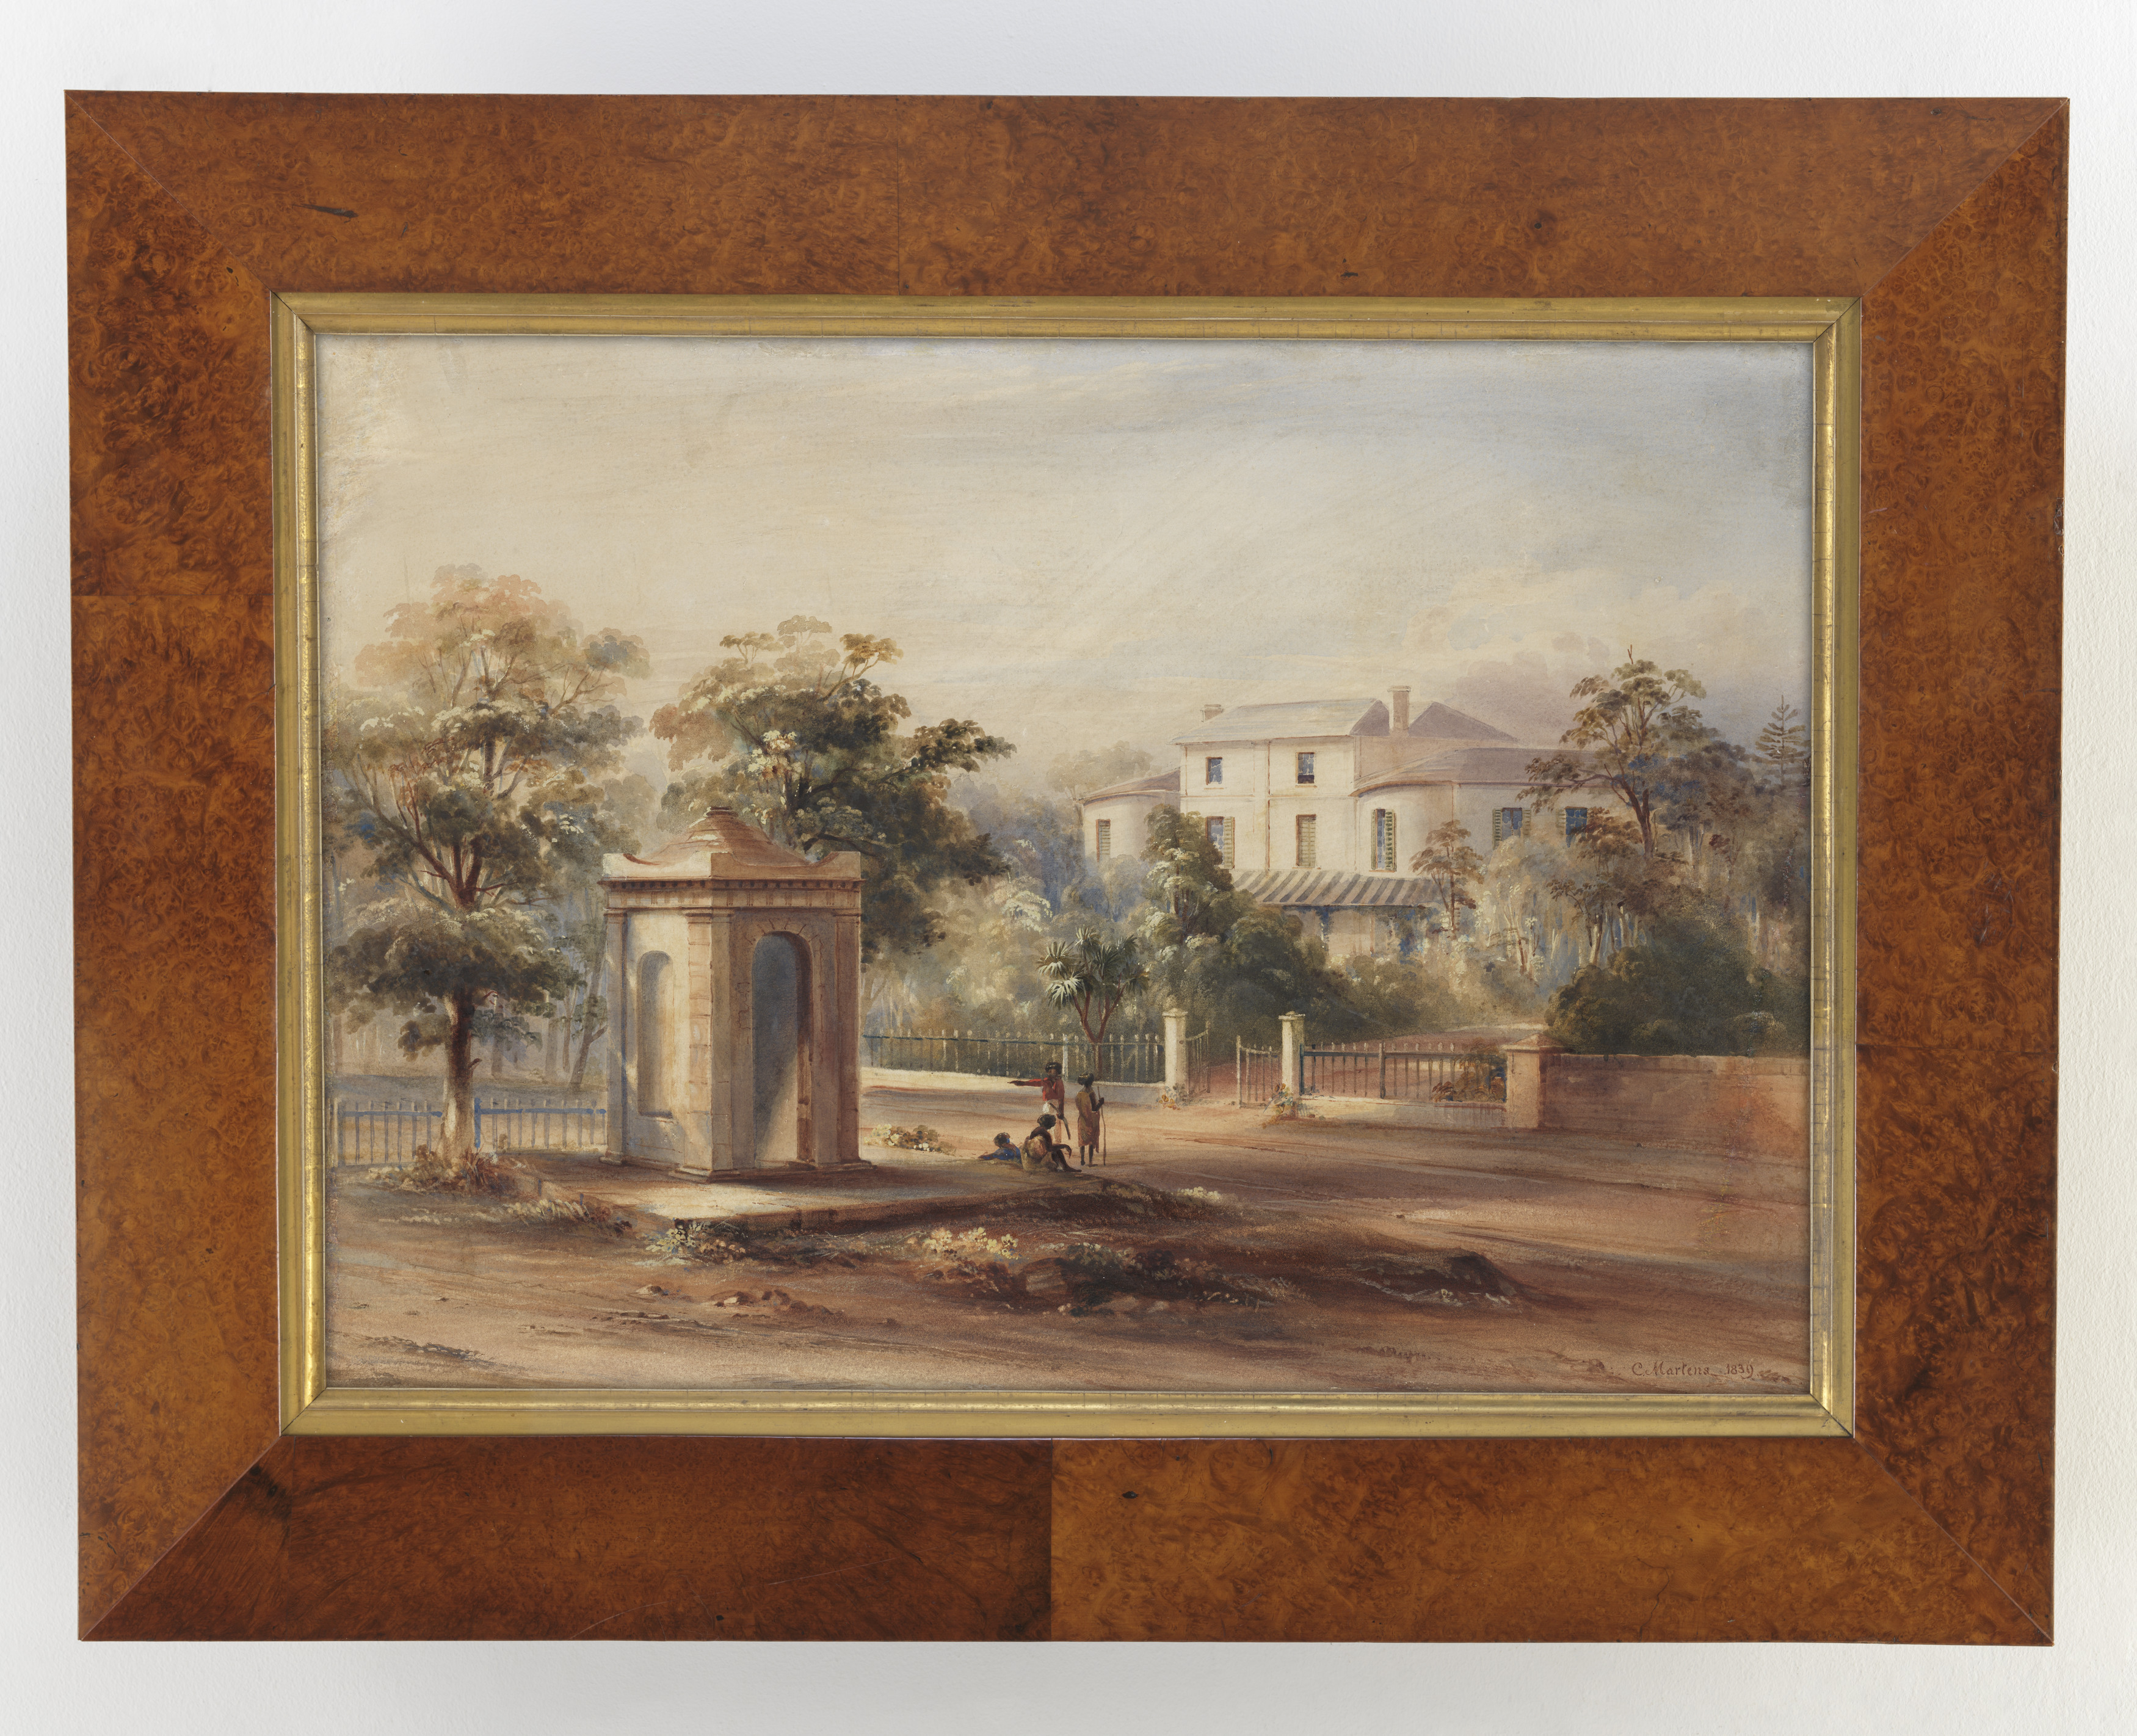 Watercolour of a grand house set in a bush-land garden - a monument stands outside the gates where a small group of people gather.